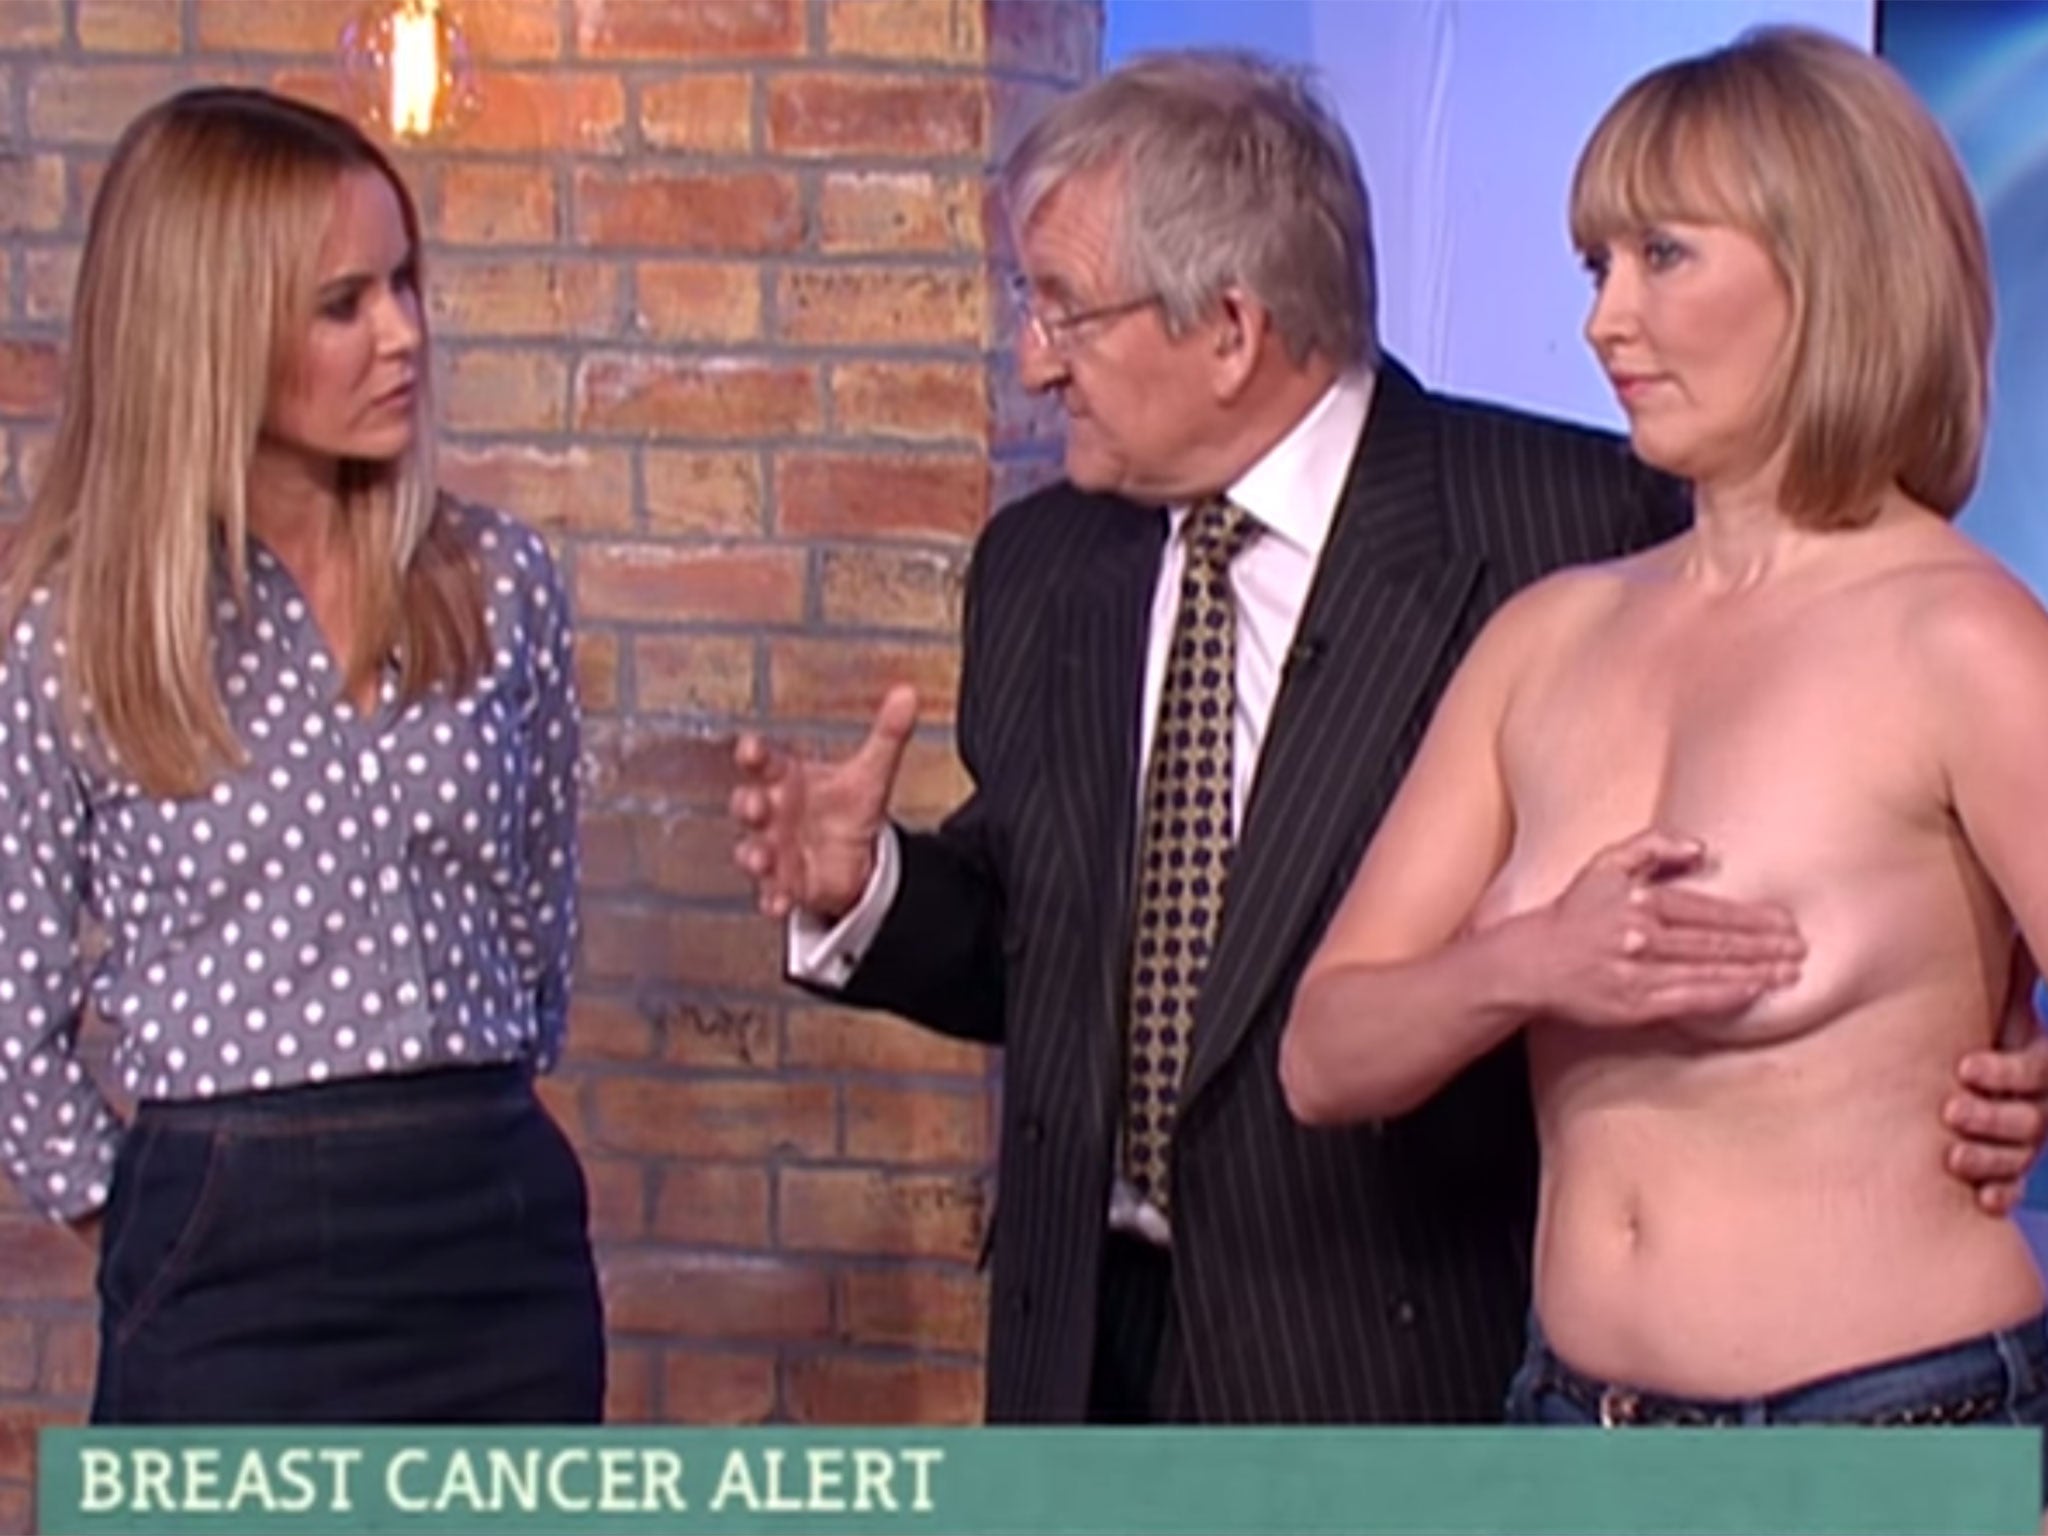 BBC News at 10 accidentally live broadcast X-rated scene ...